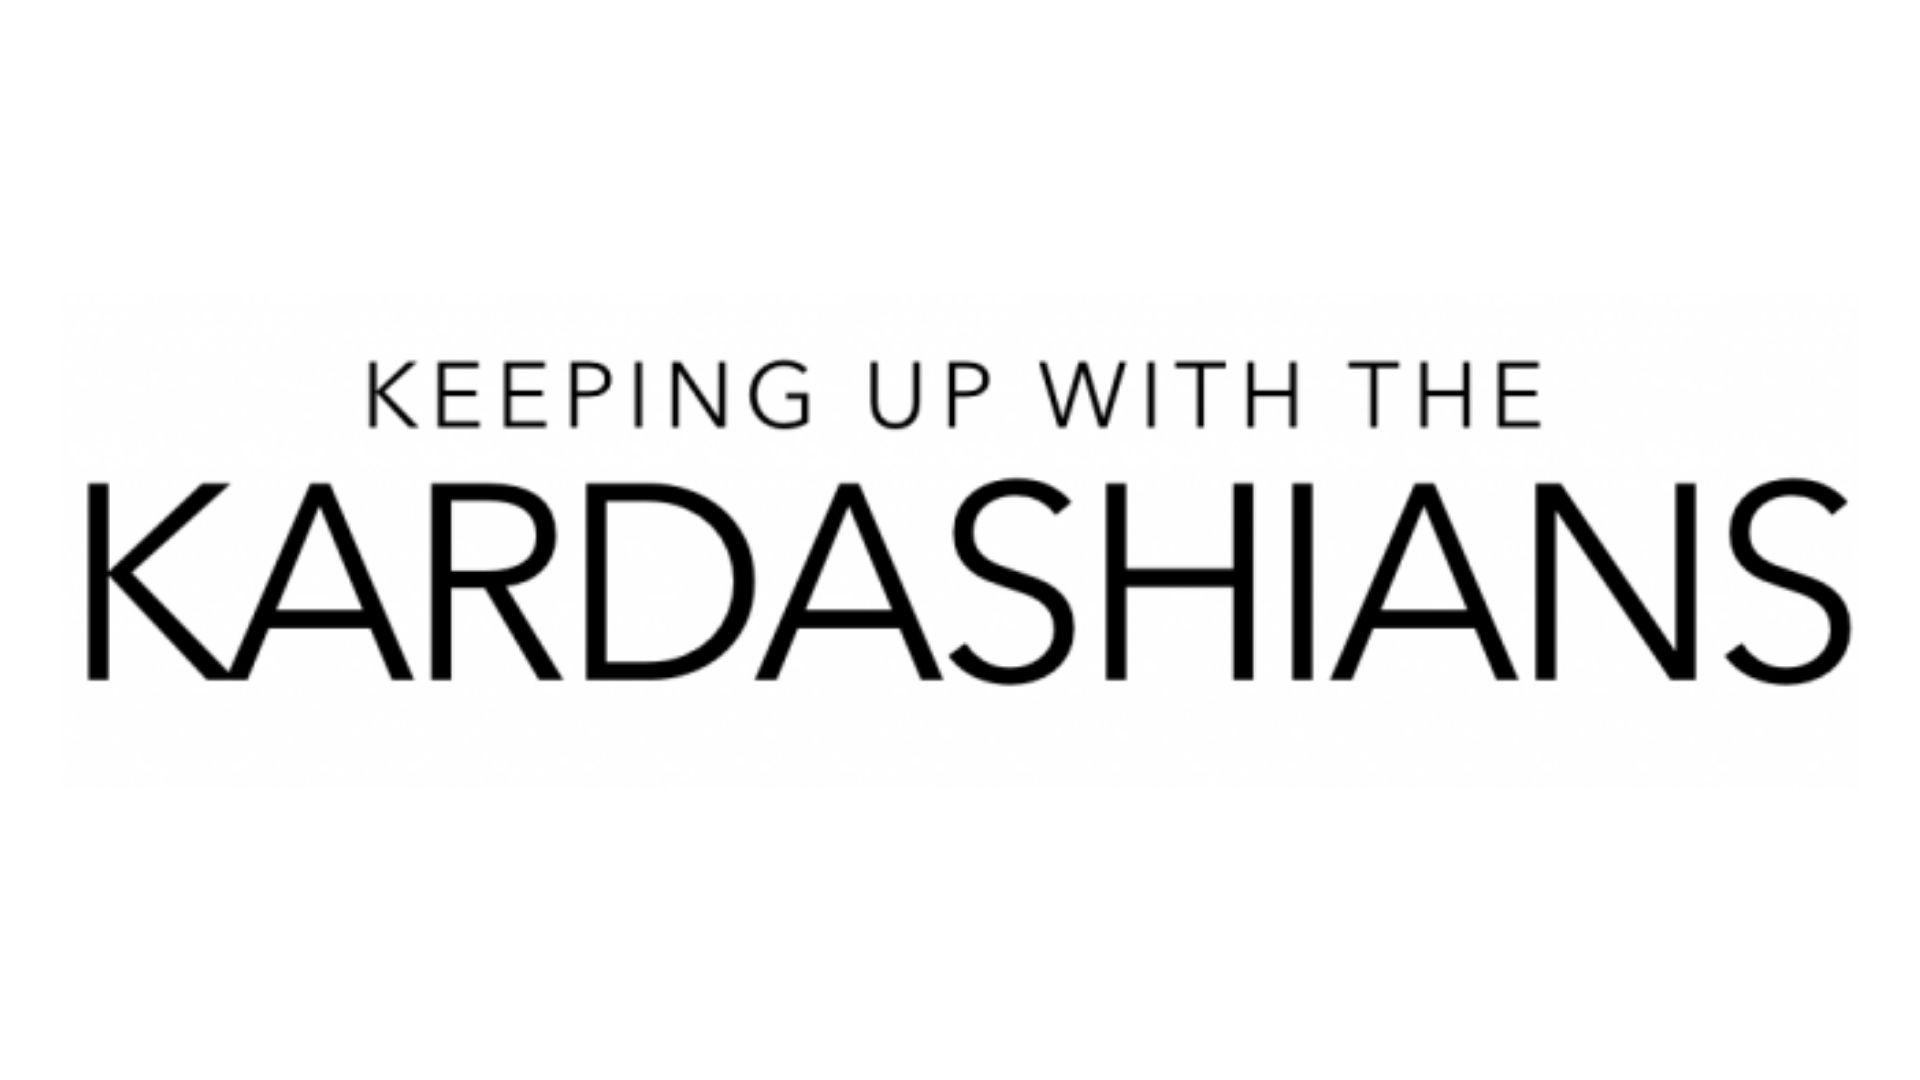 Keeping Up with the Kardashians wallpaper and images